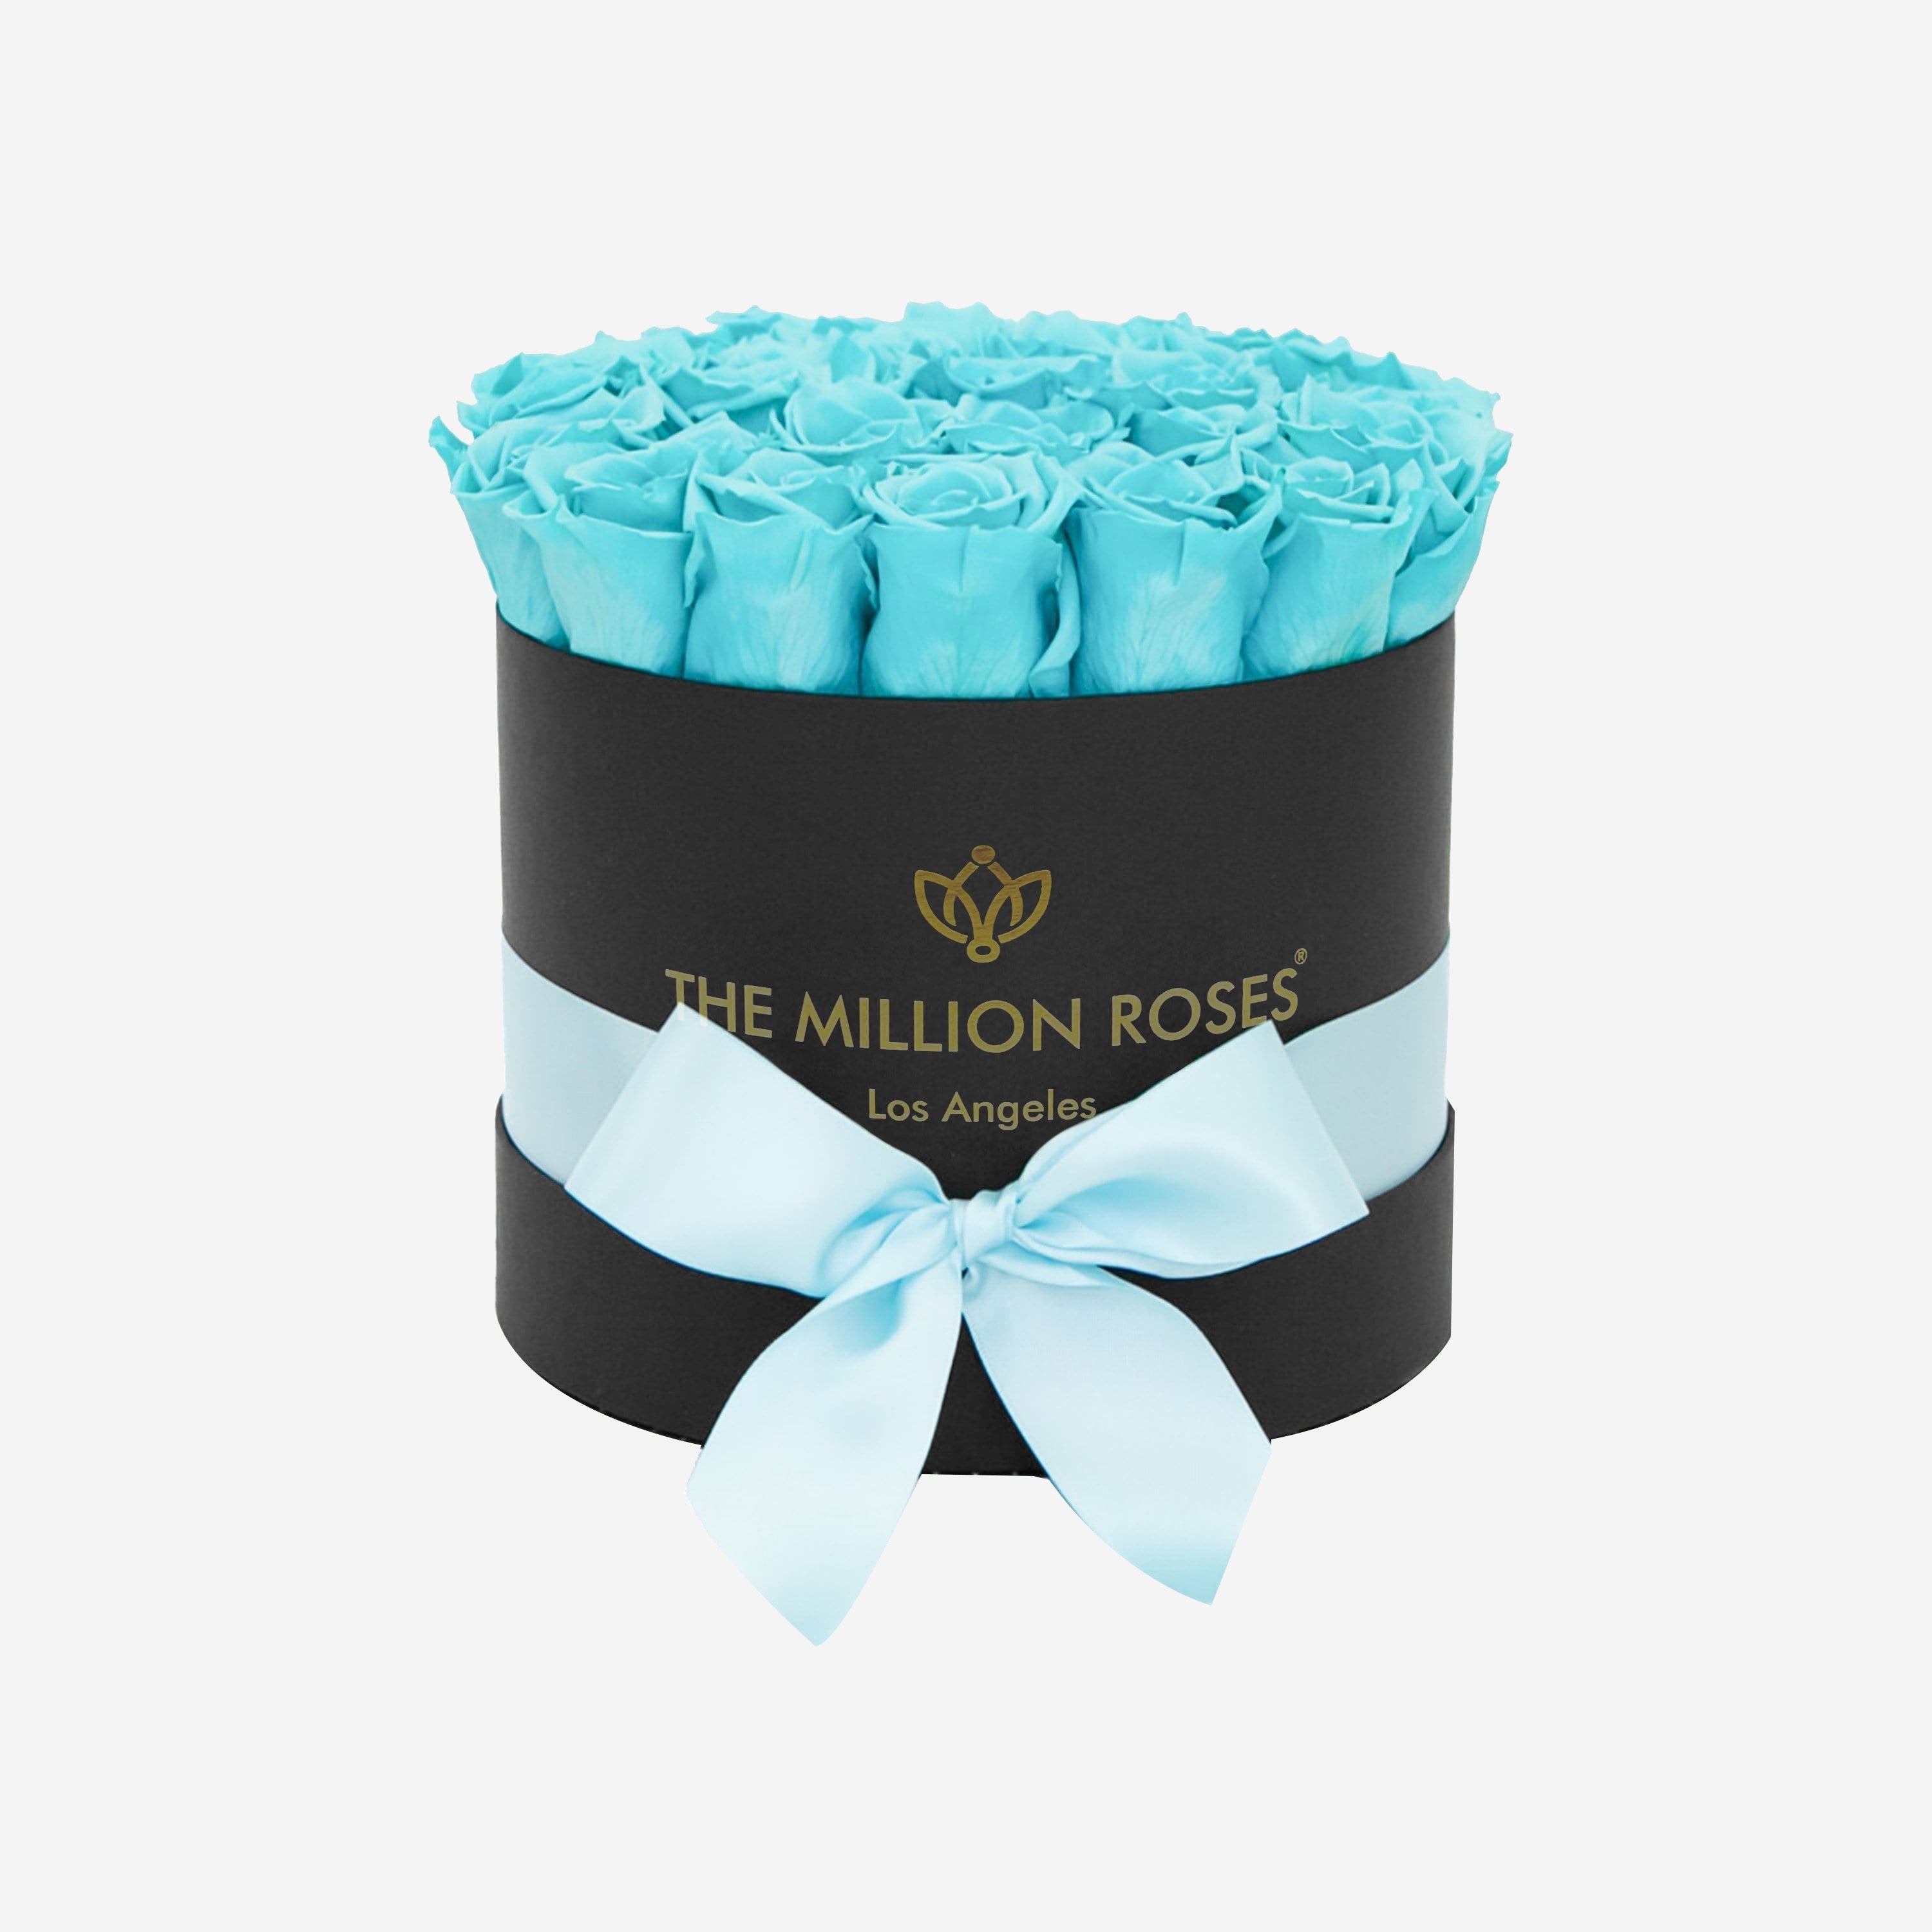 Tiffany Blue Cookie Gift Box for Food Packaging - China Box and Food Box  price